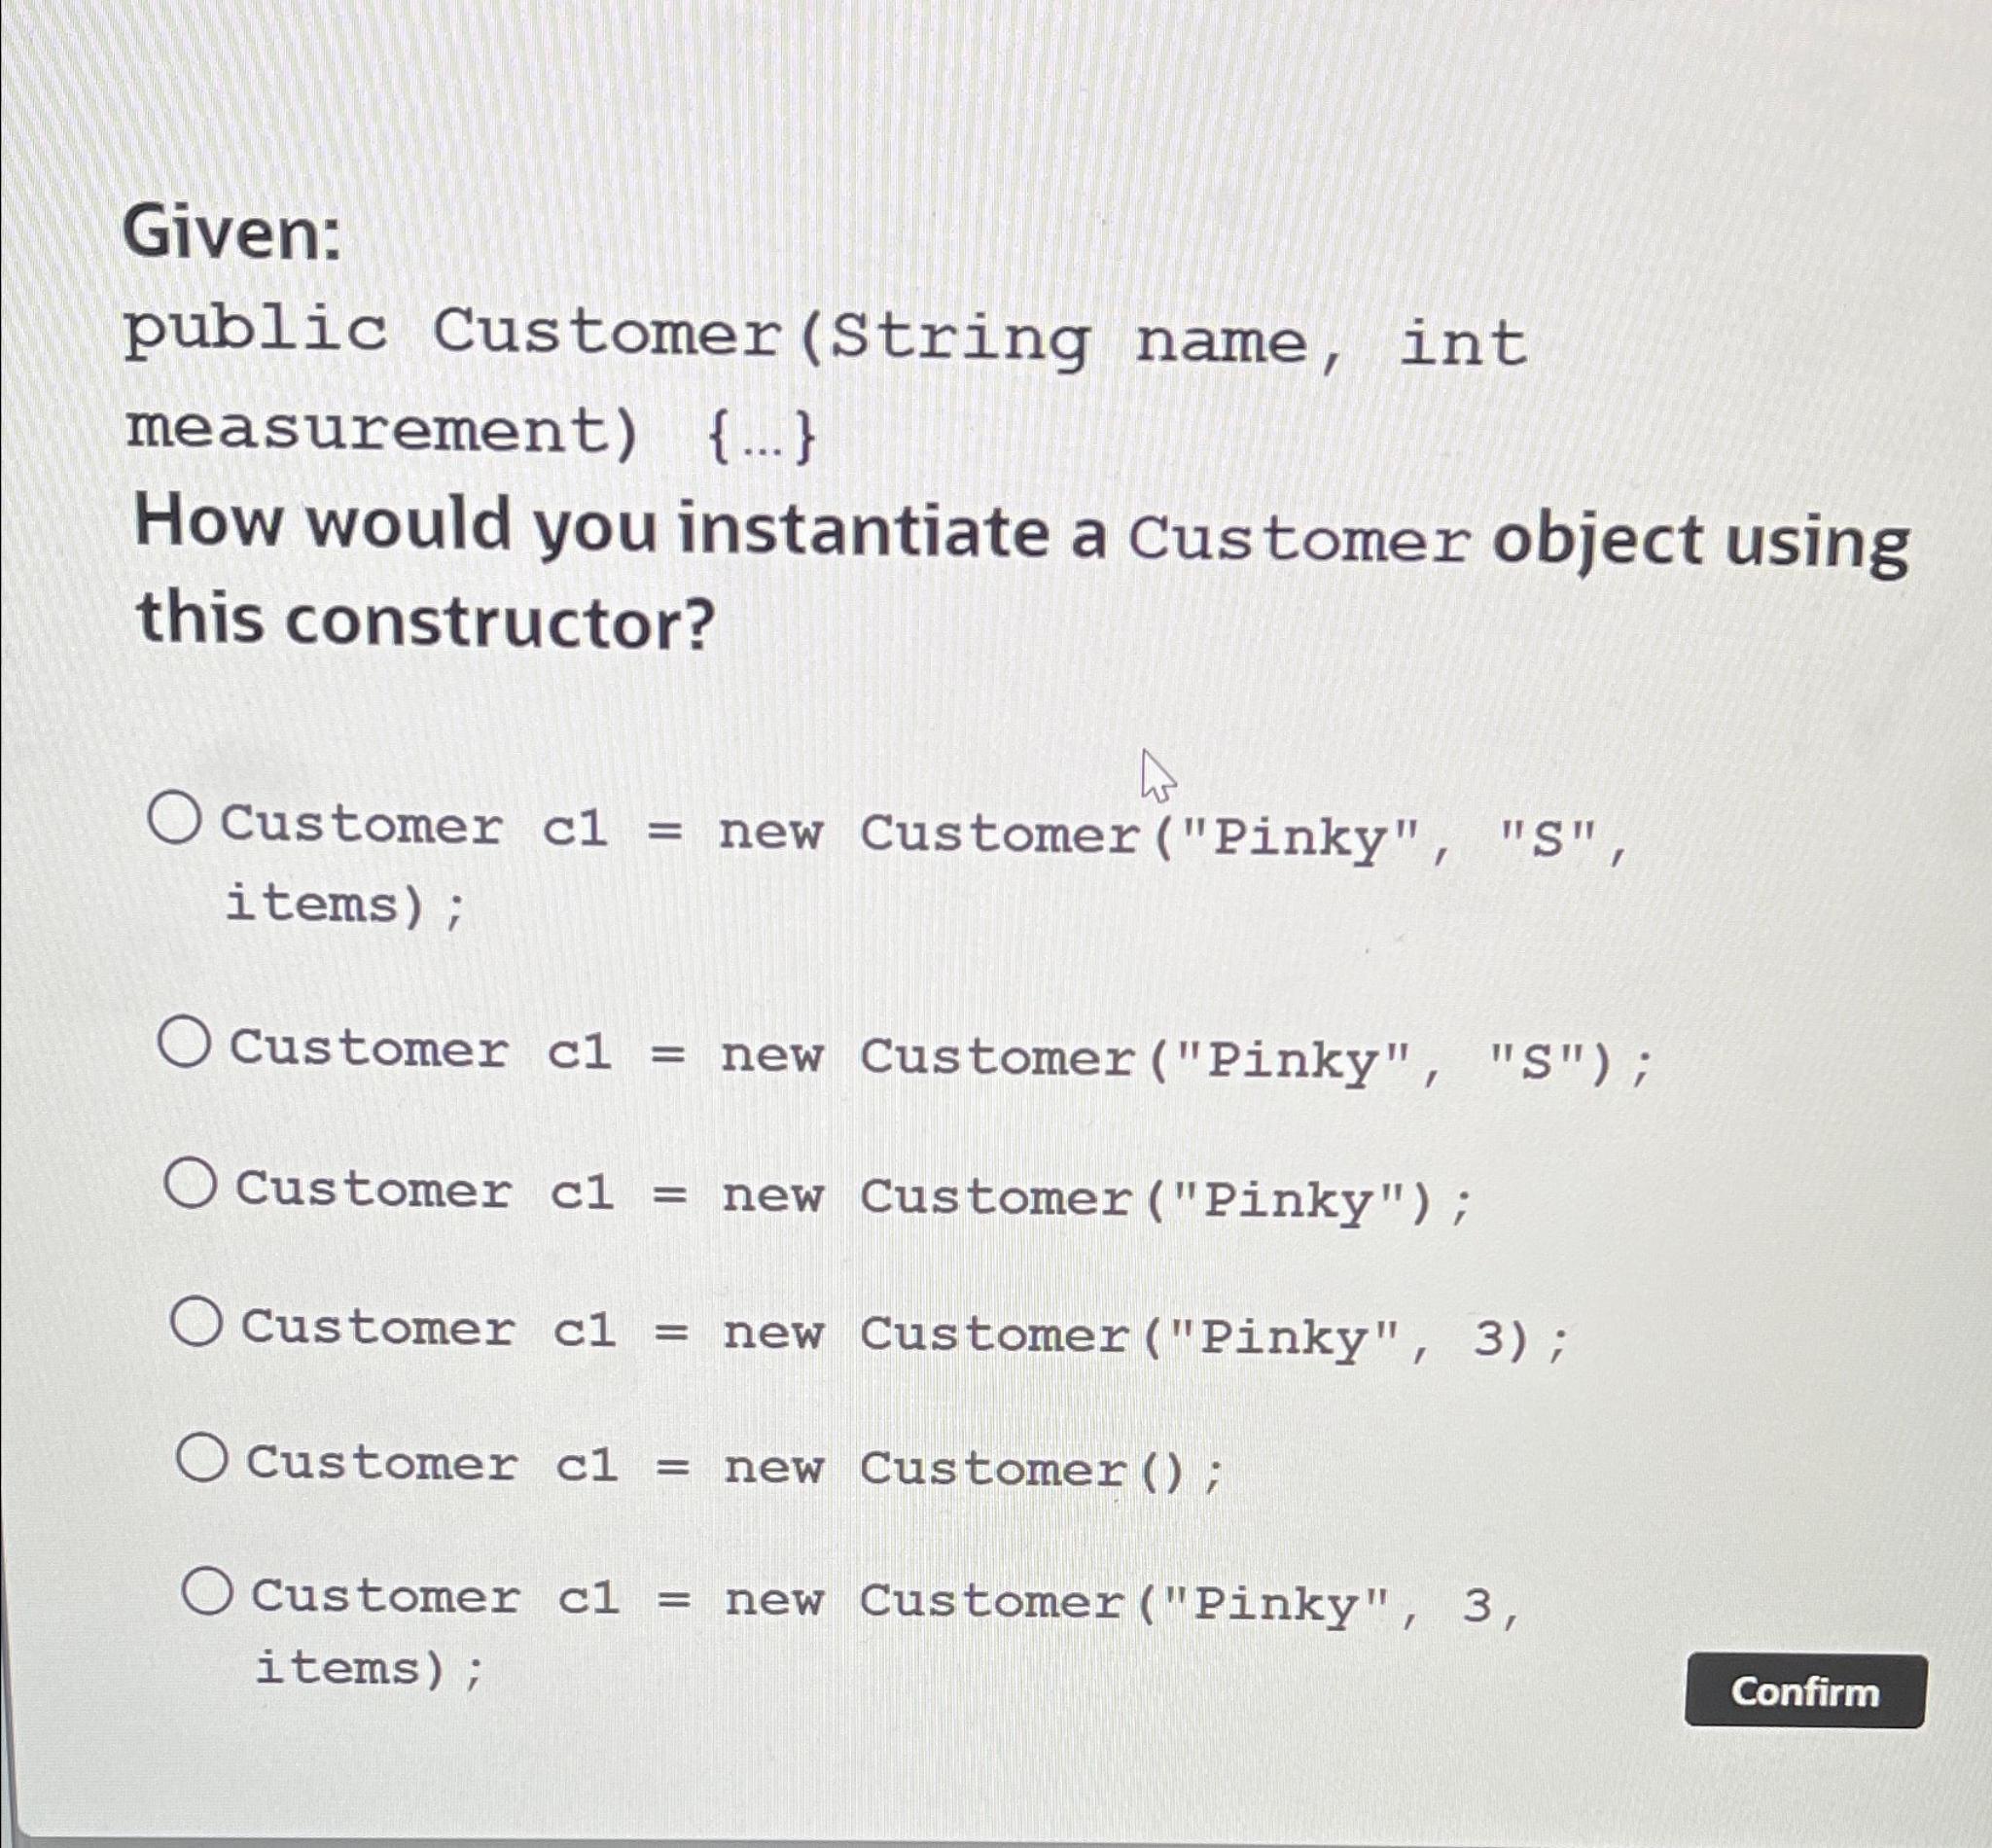 Given: public Customer (String name, int measurement) {...} How would you instantiate a Customer object using